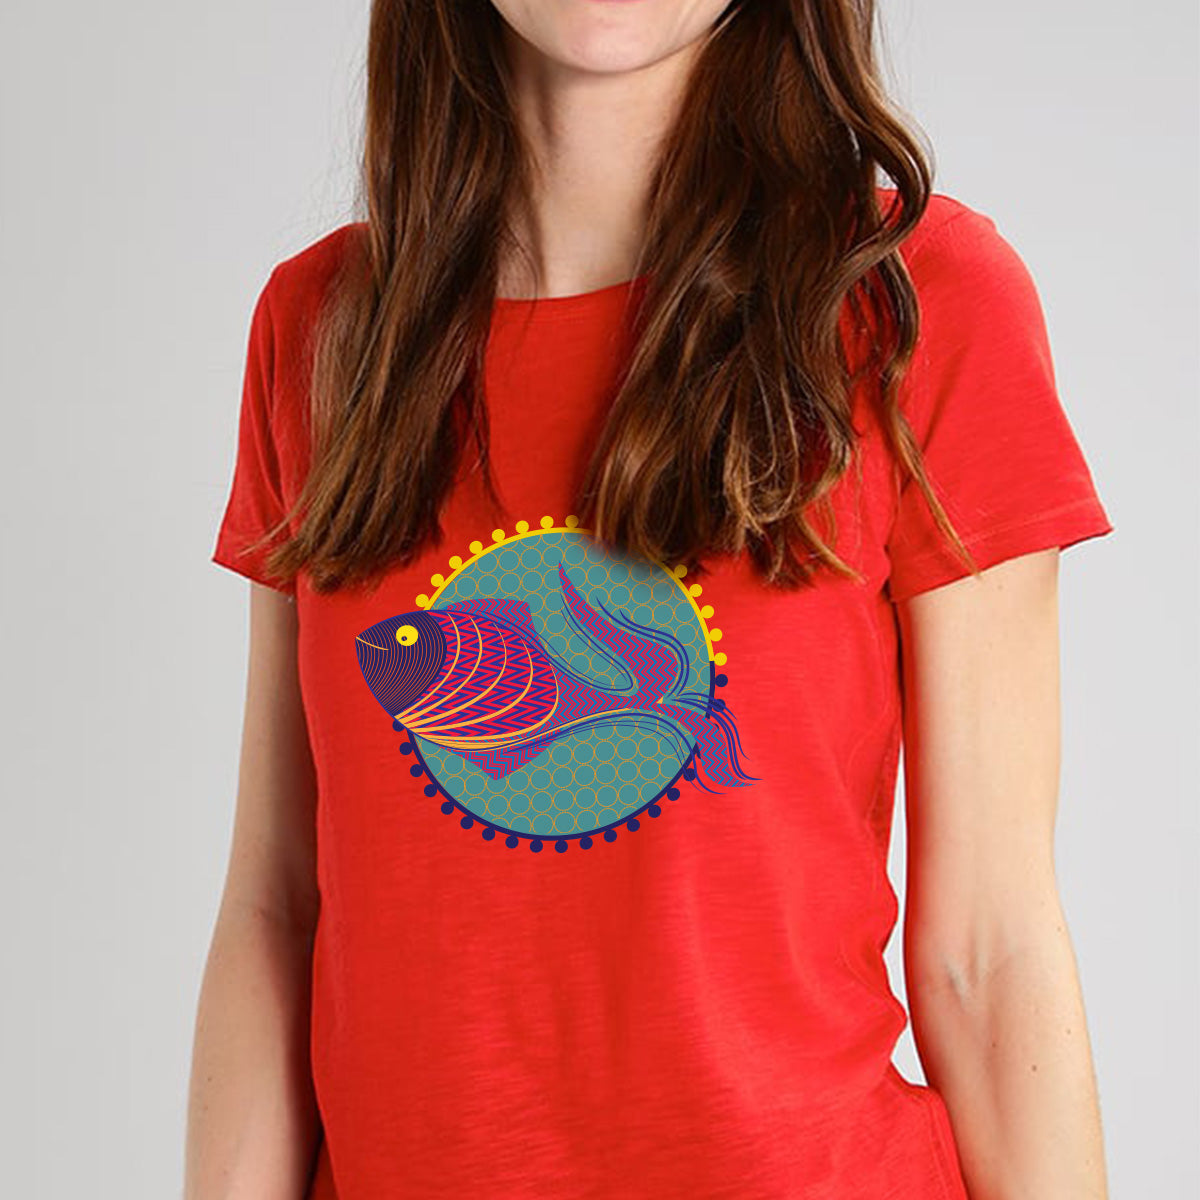 The Pretty Fish Red T- Shirt